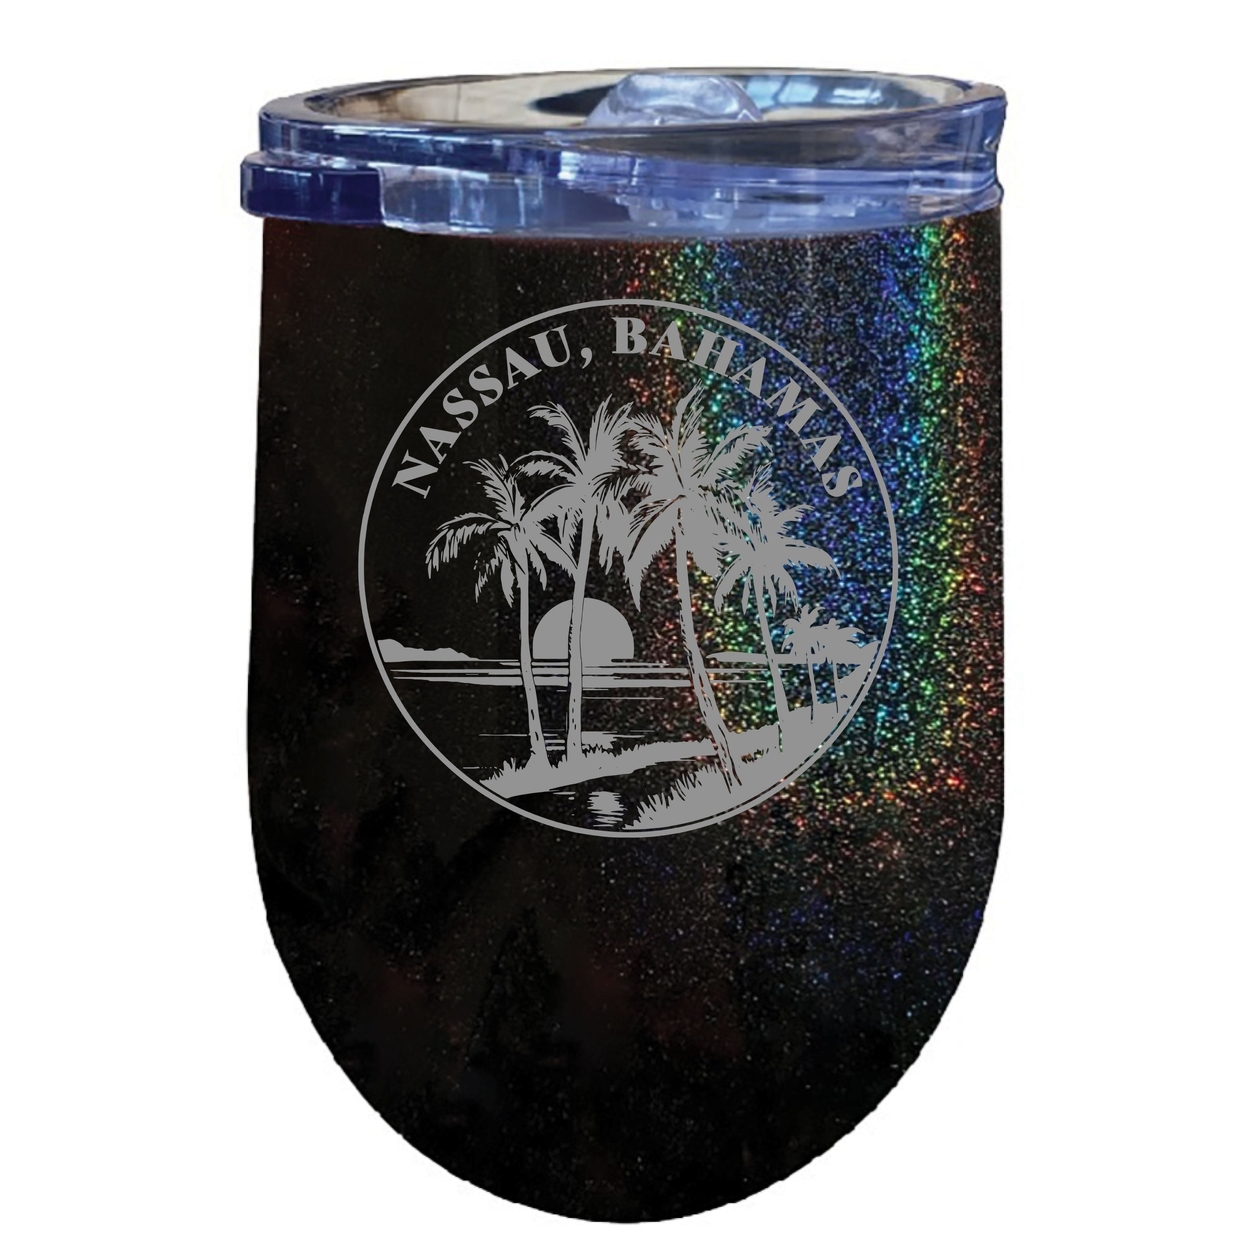 Nassau The Bahamas Souvenir 12 Oz Engraved Insulated Wine Stainless Steel Tumbler - Black,,4-Pack